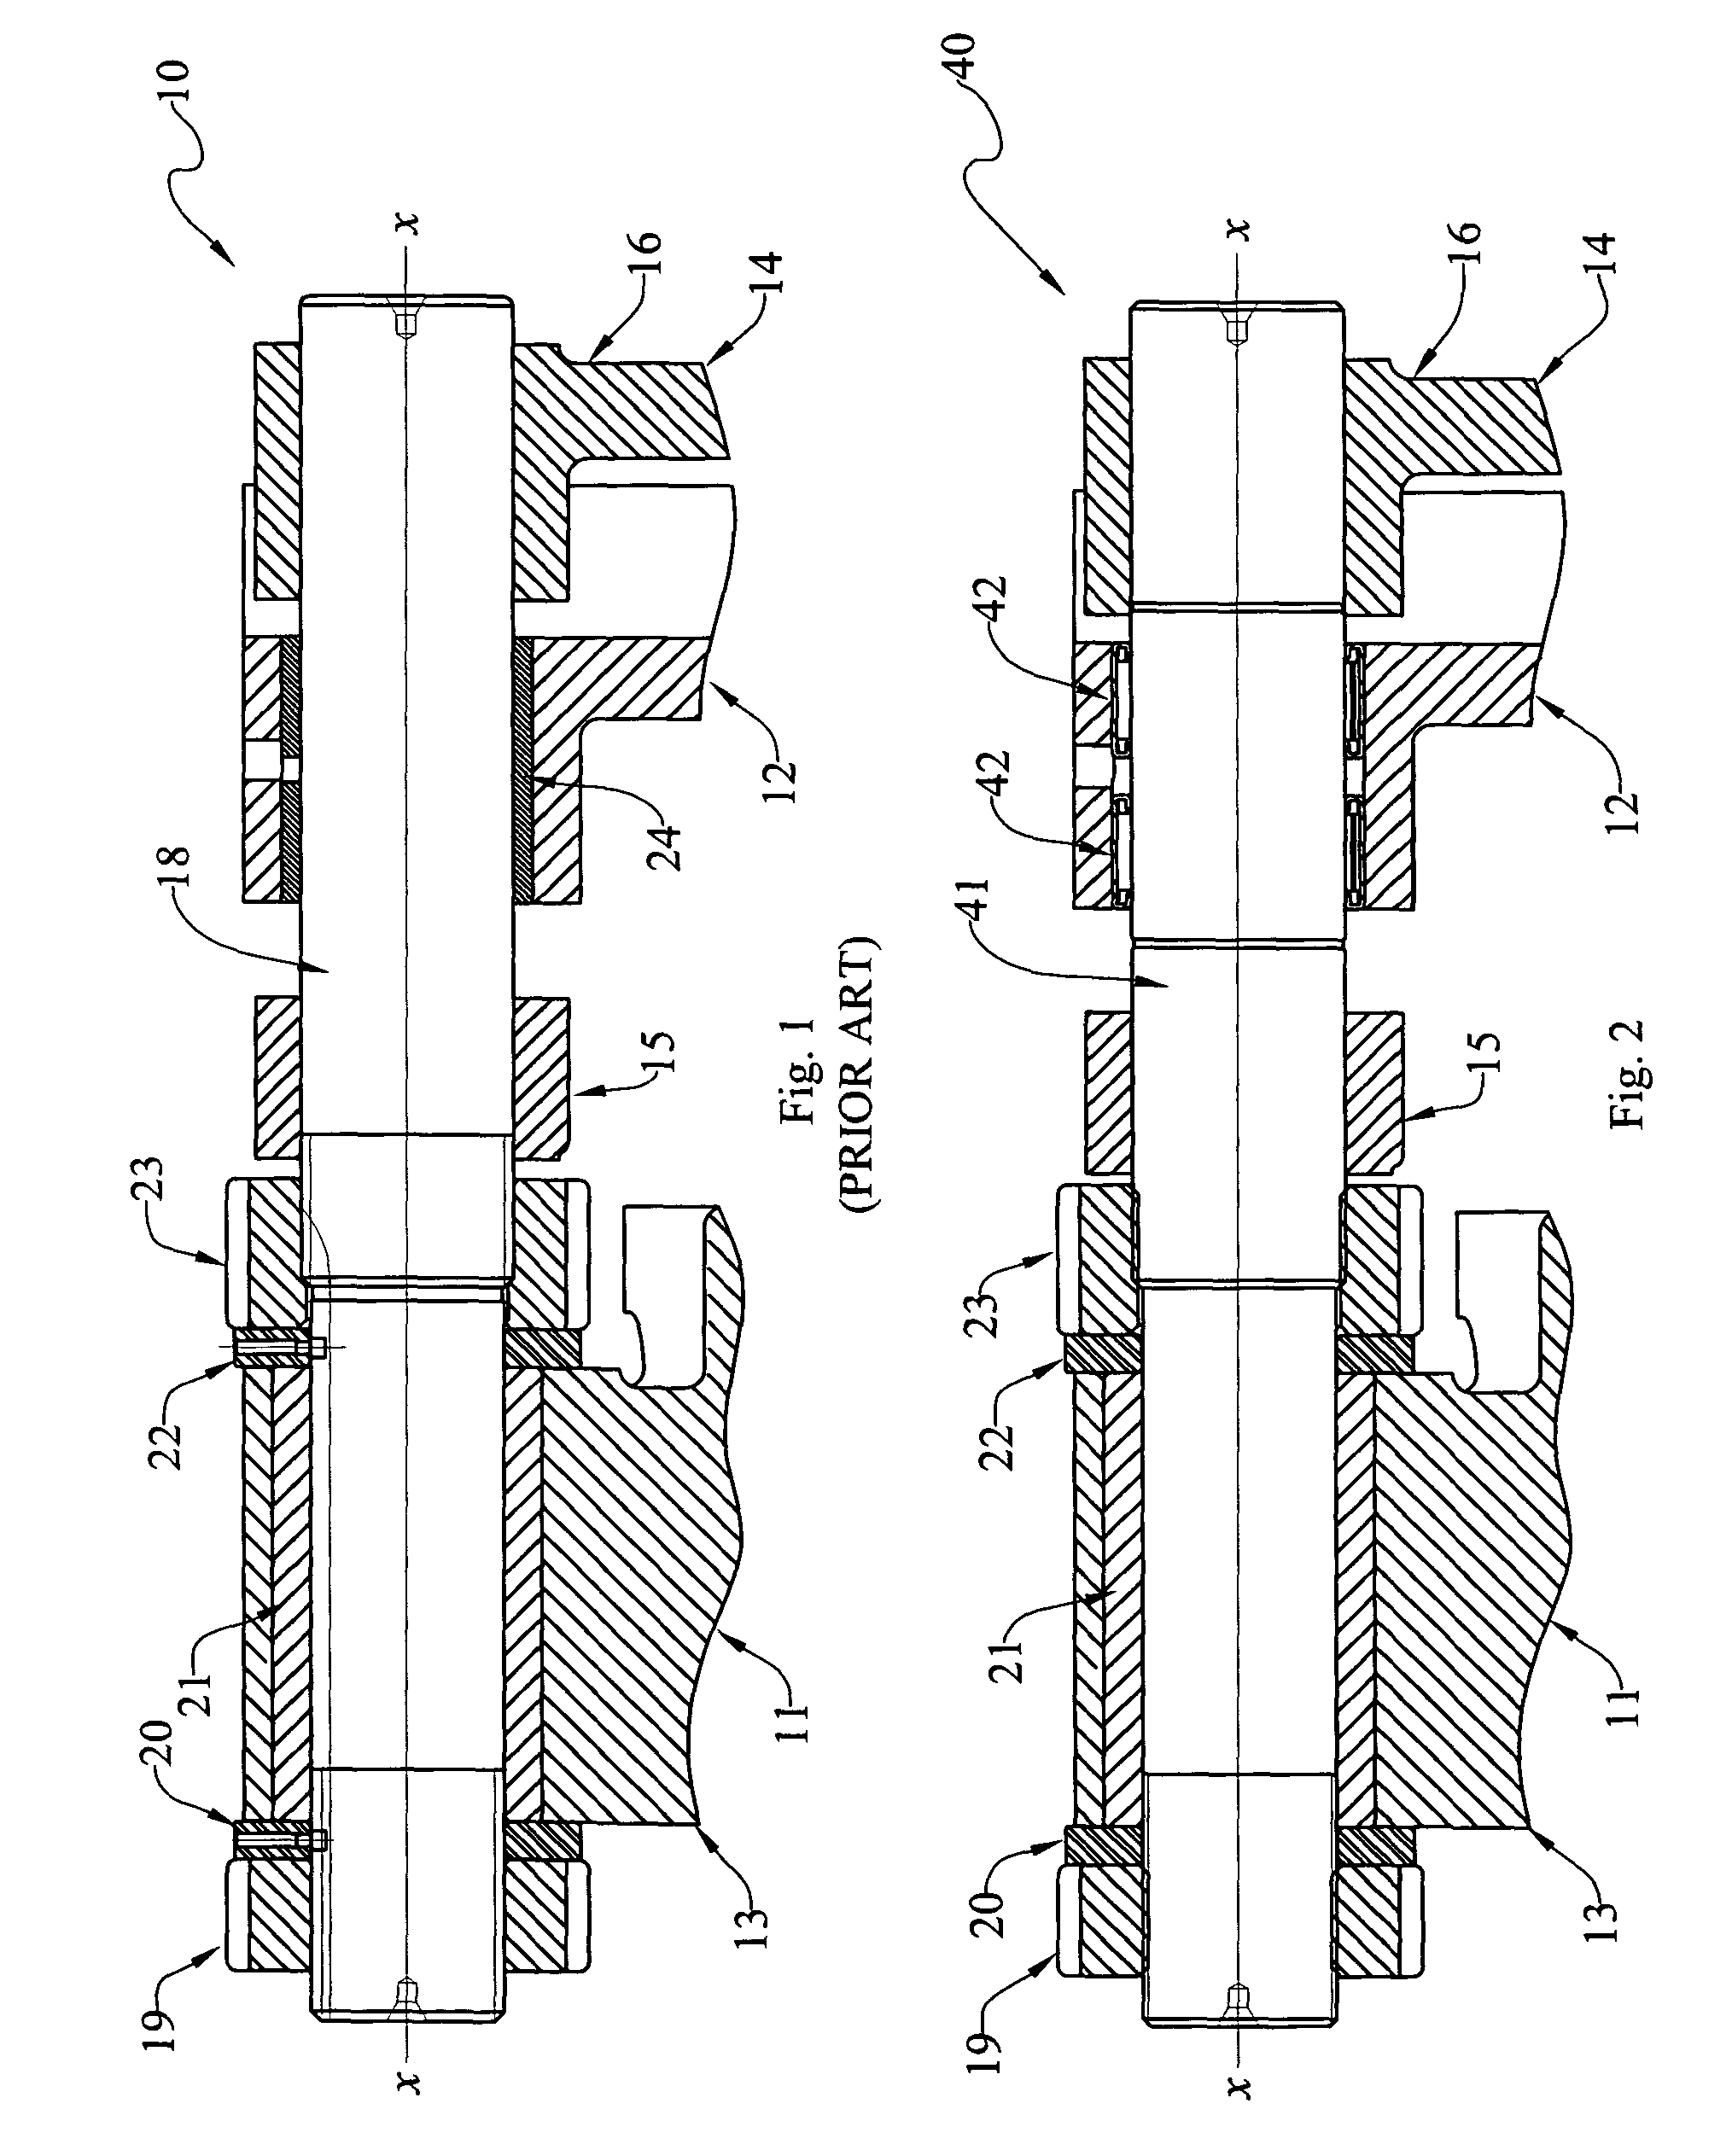 Multi-spindle screw machine, and improved tool arm for use therein